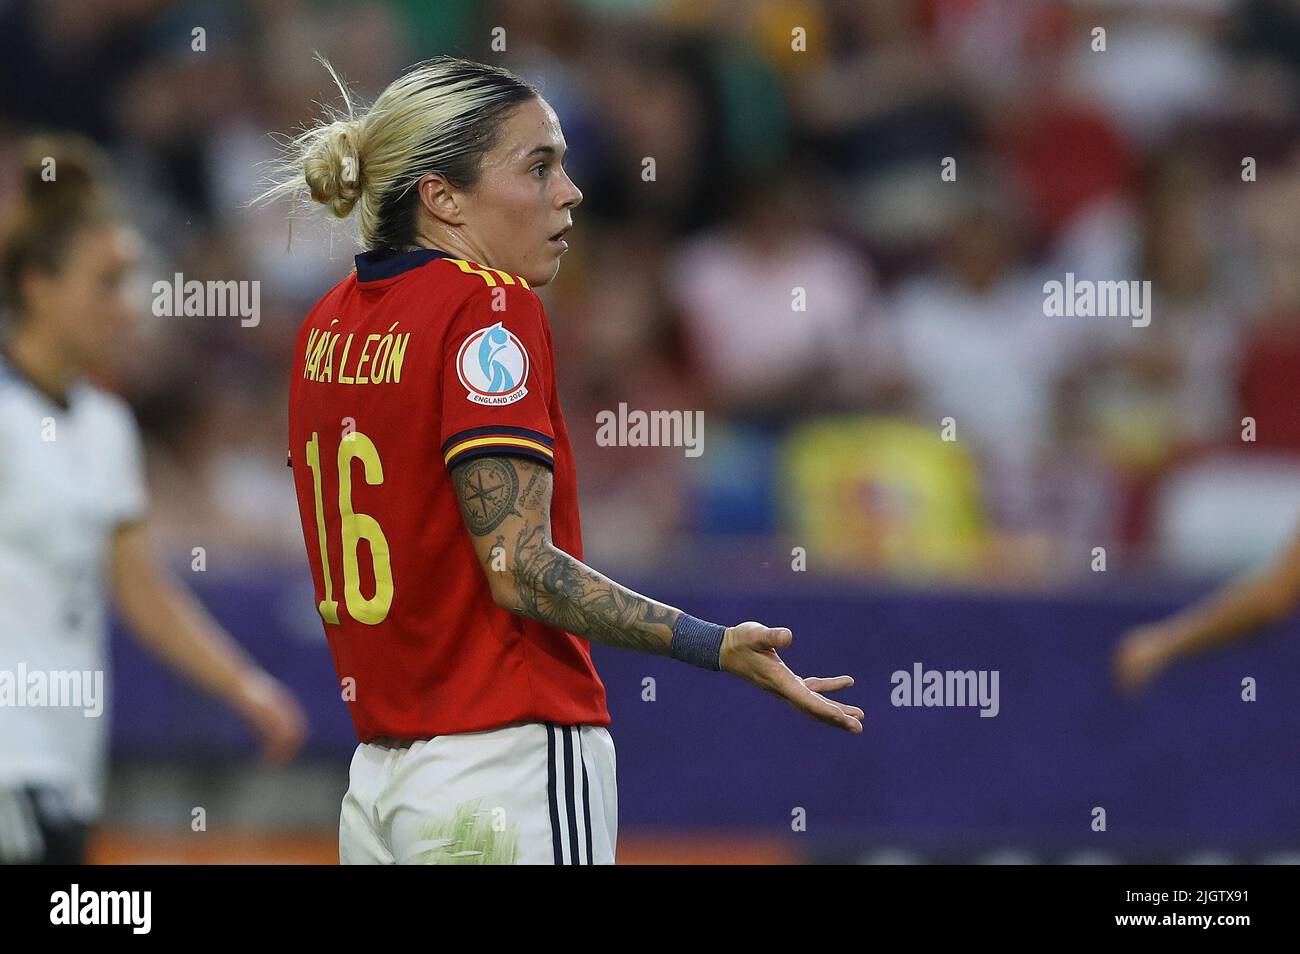 London, England, 12th July 2022. Mapi Leon of Spain during the UEFA Women's European Championship 2022 match at Brentford Community Stadium, London. Picture credit should read: Paul Terry / Sportimage Stock Photo